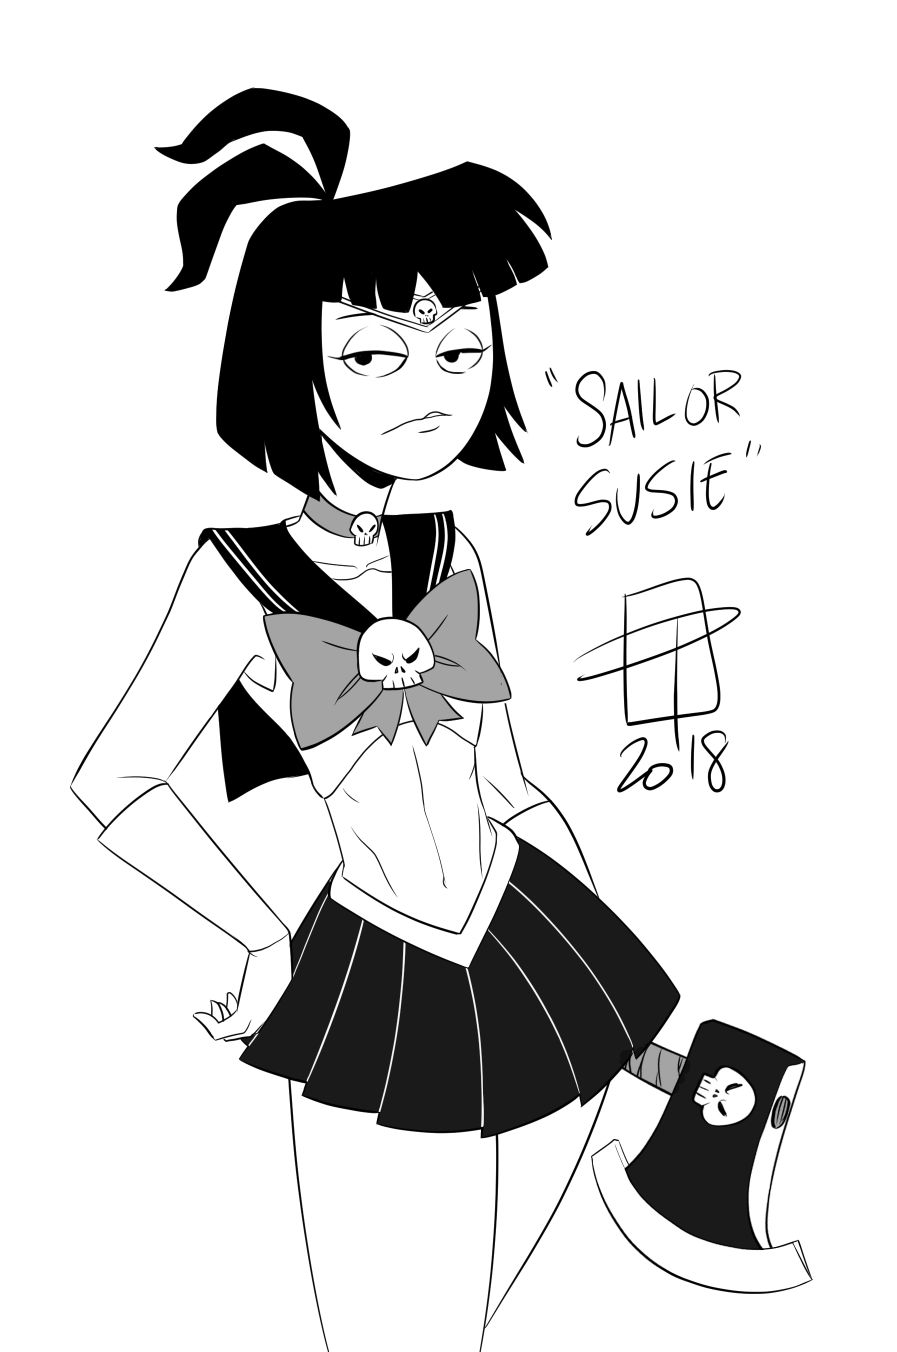 callmepo: “In the name of la lune… I will KEEL you…”  Creepy Susie as Sailor